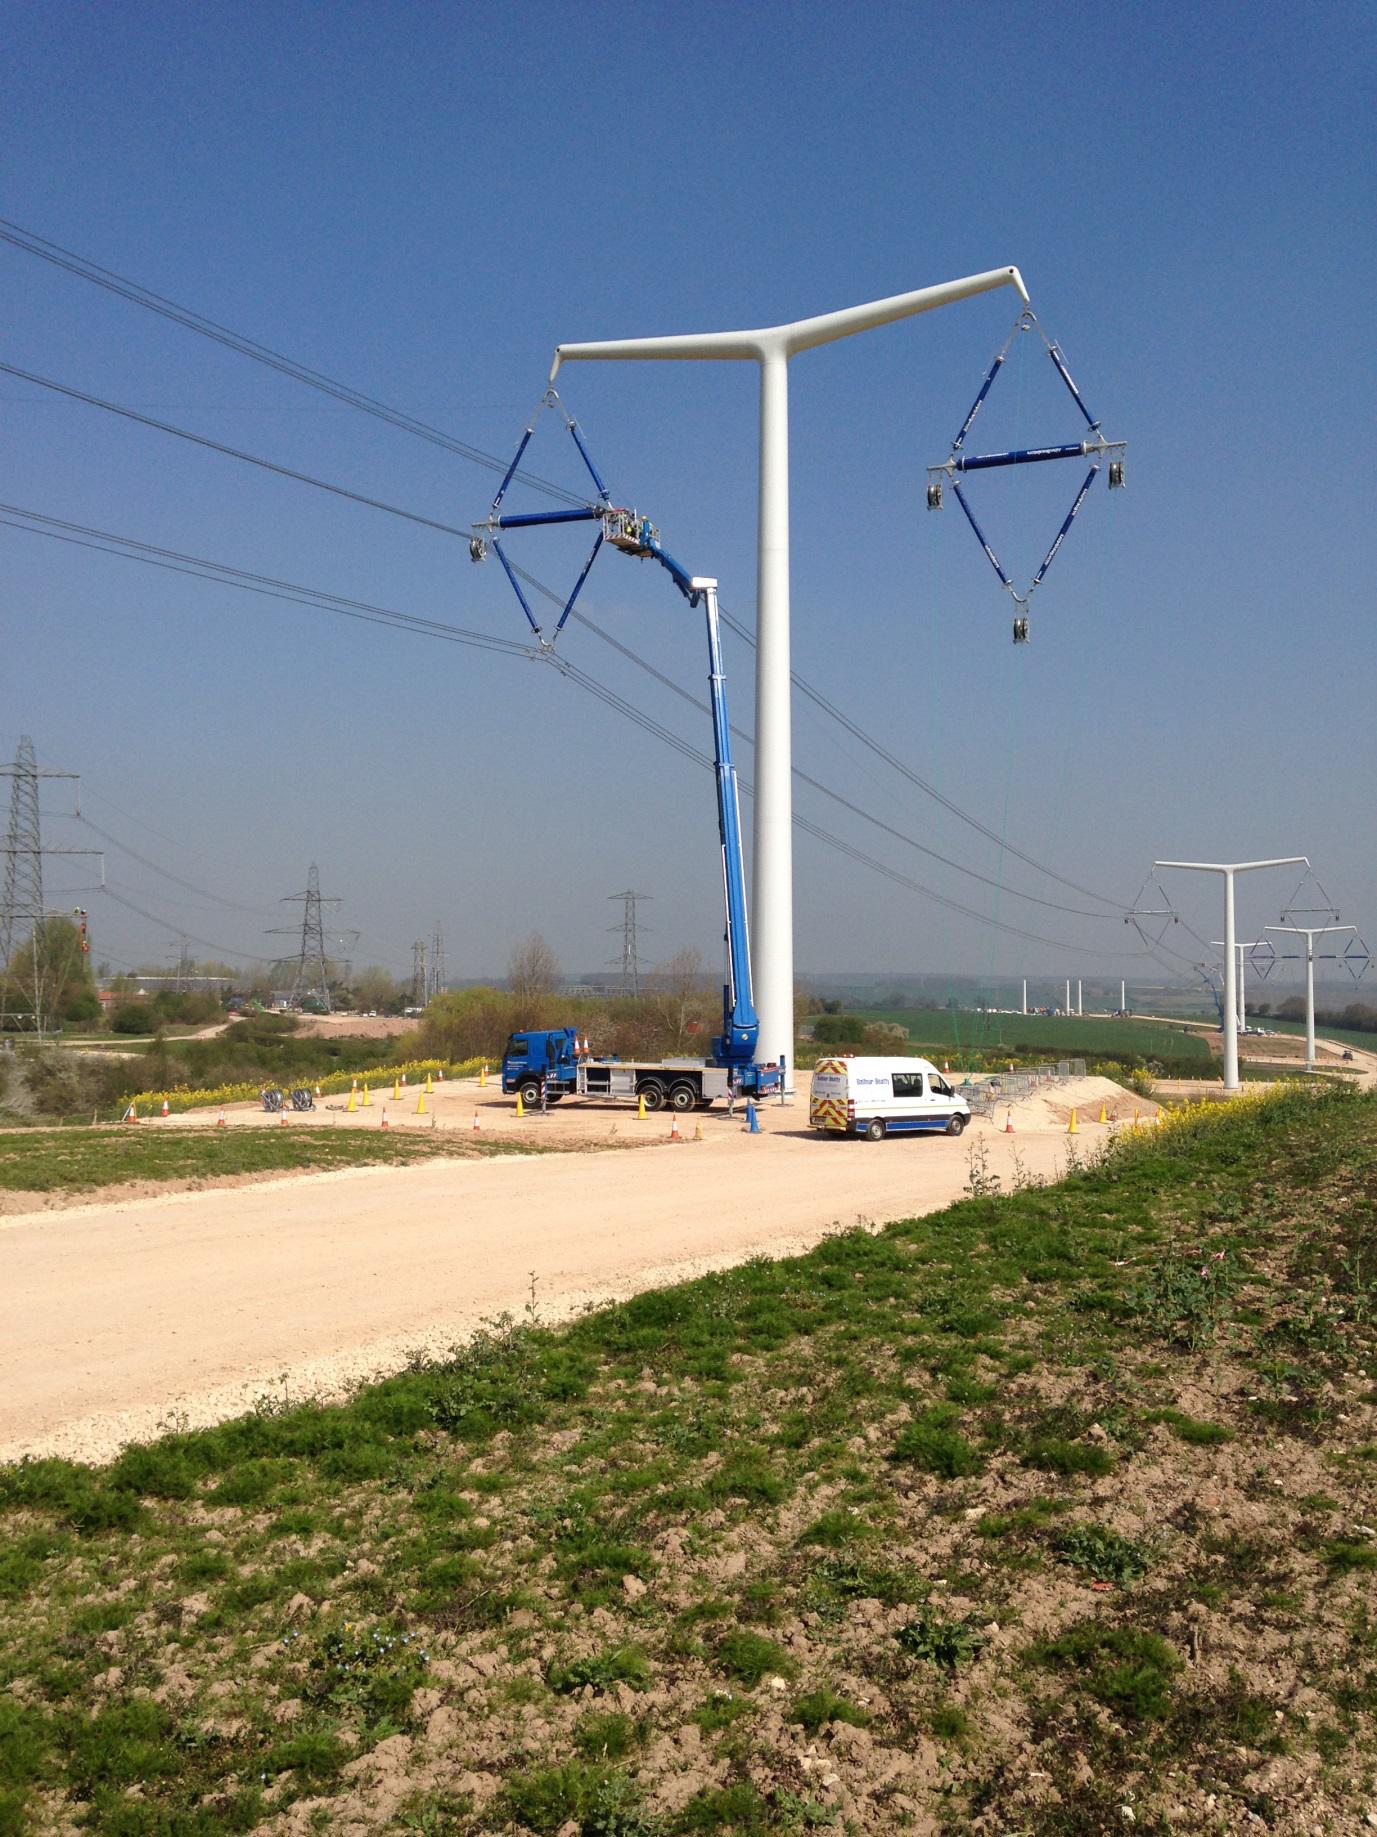 New style electricity pylons being constructed